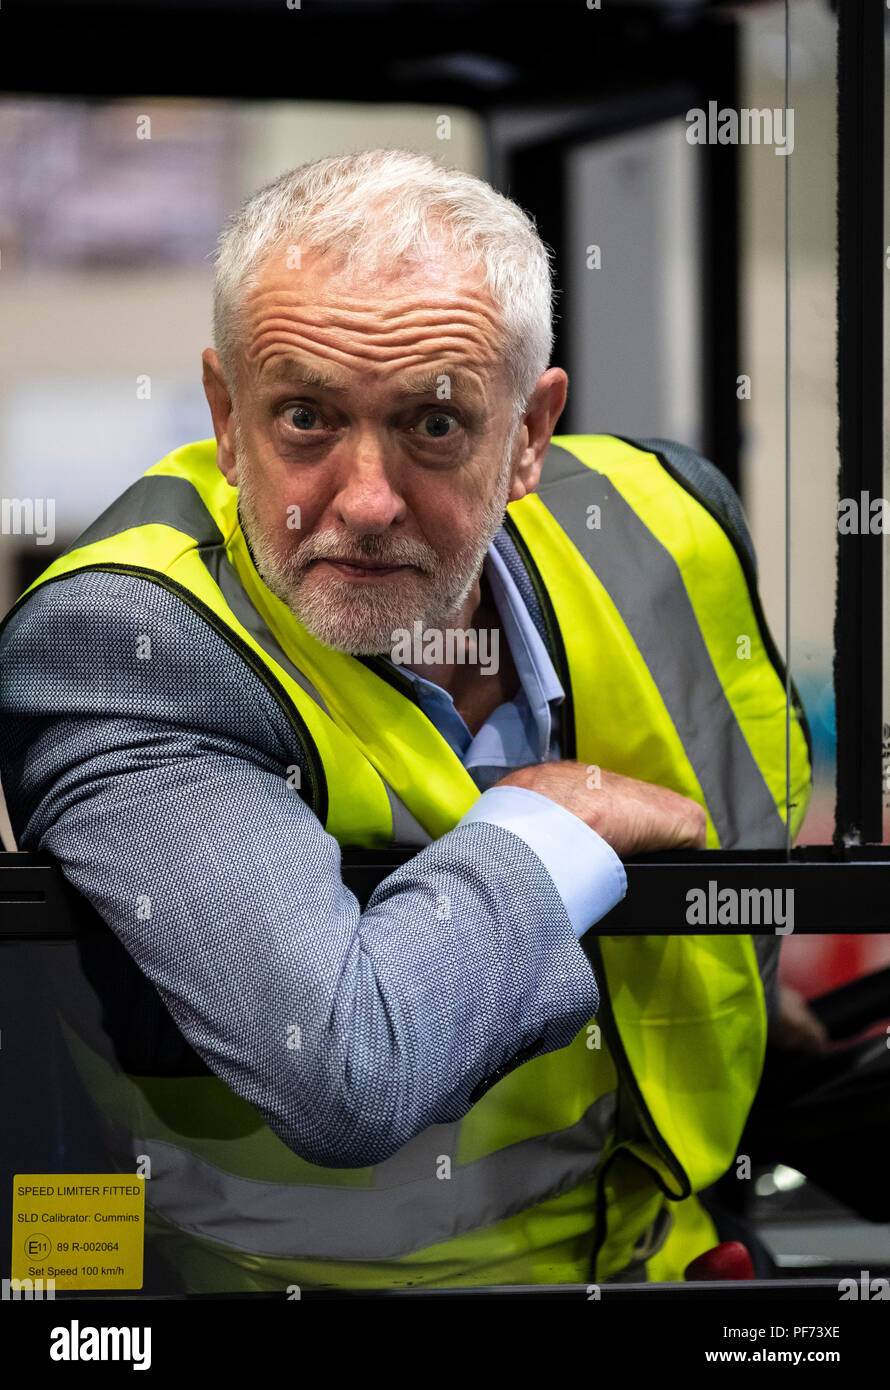 Falkirk, Scotland, UK; 20 August, 2018. Labour Leader Jeremy Corbyn and Scottish Labour Leader Richard Leonard visit Alexander Dennis bus manufacturers in Falkirk as part of Labour's 'Build it in Britain' policy. Credit: Iain Masterton/Alamy Live News Stock Photo